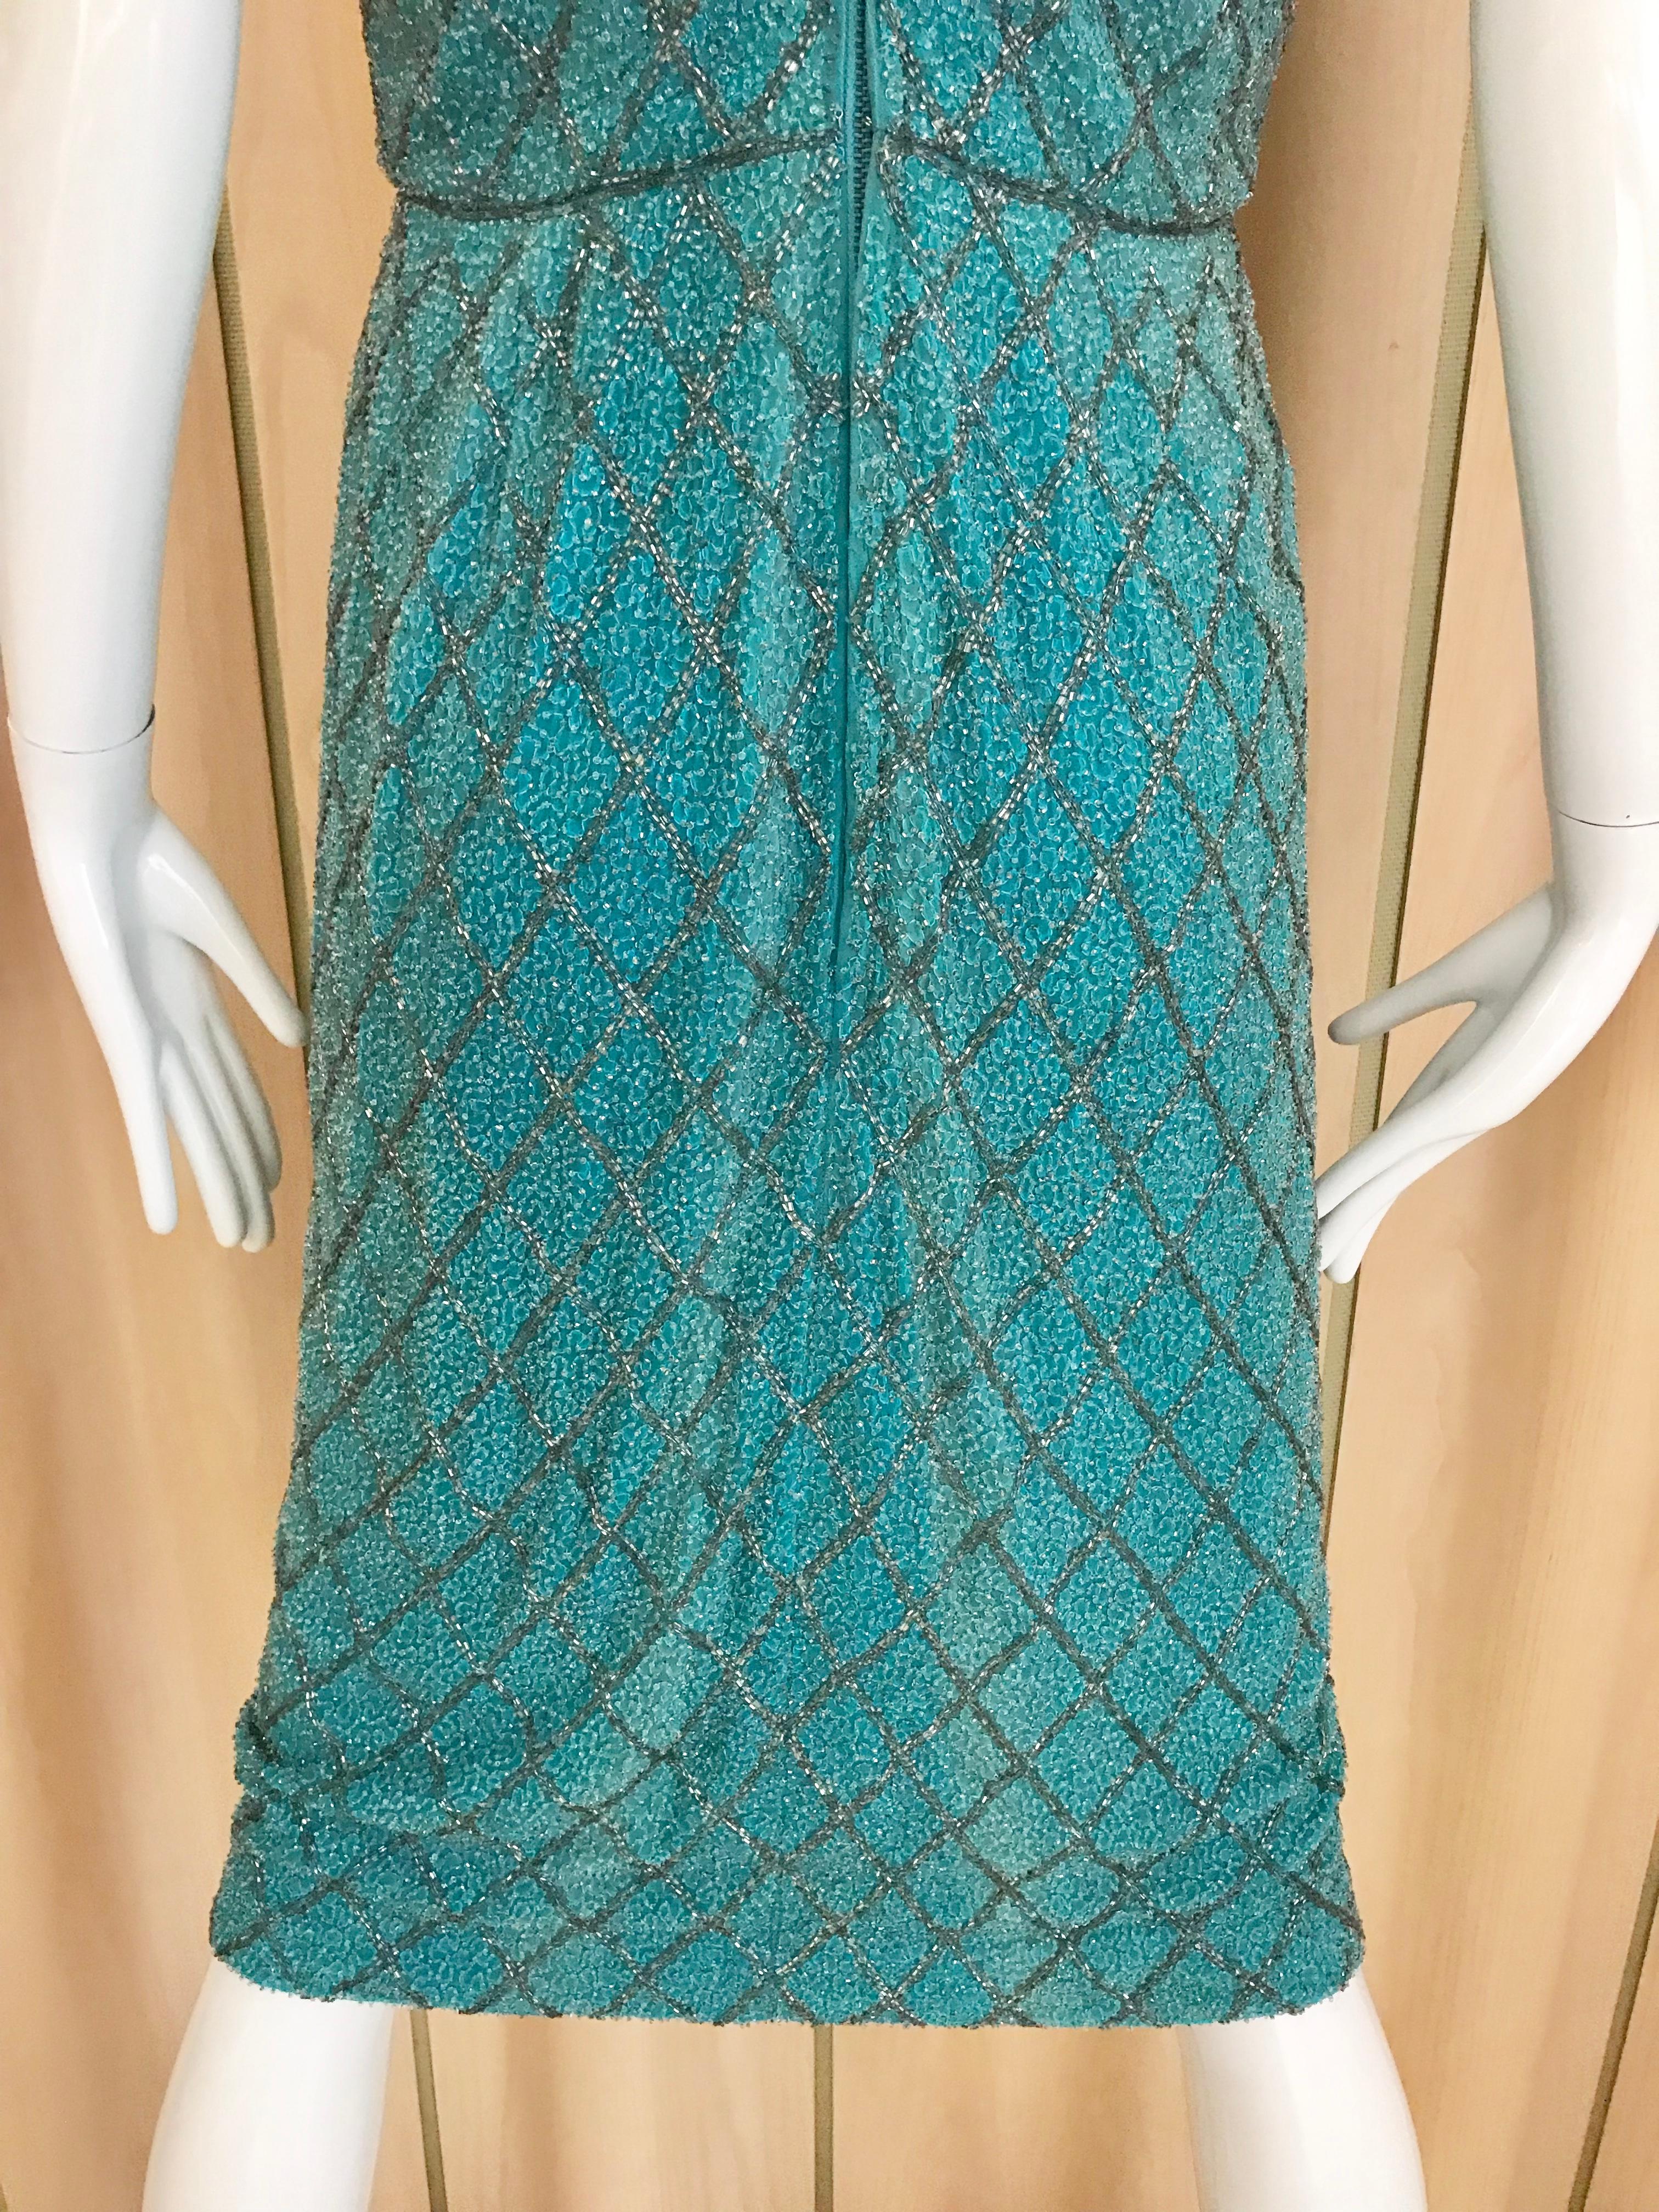 1960s Blue Beaded Sheath Dress with silver and grey beads 1